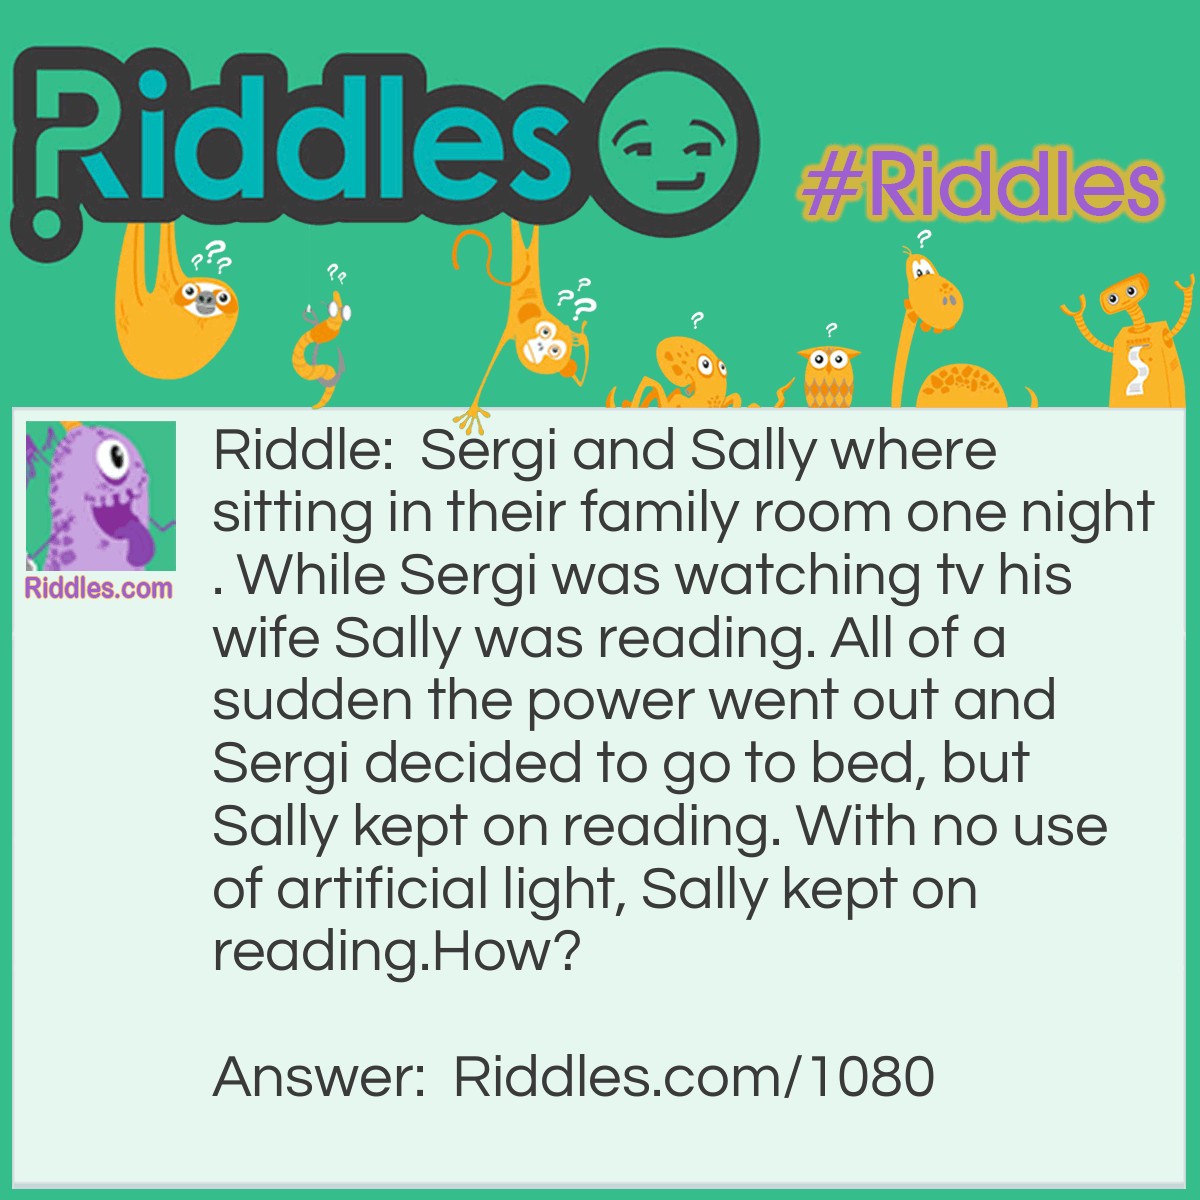 Riddle: Sergi and Sally were sitting in their family room one night. While Sergi was watching tv his wife Sally was reading. All of a sudden the power went out and Sergi decided to go to bed, but Sally kept on reading. With no use of artificial light, Sally kept on reading.
How? Answer: Sally was blind... she was reading a book by Braille.